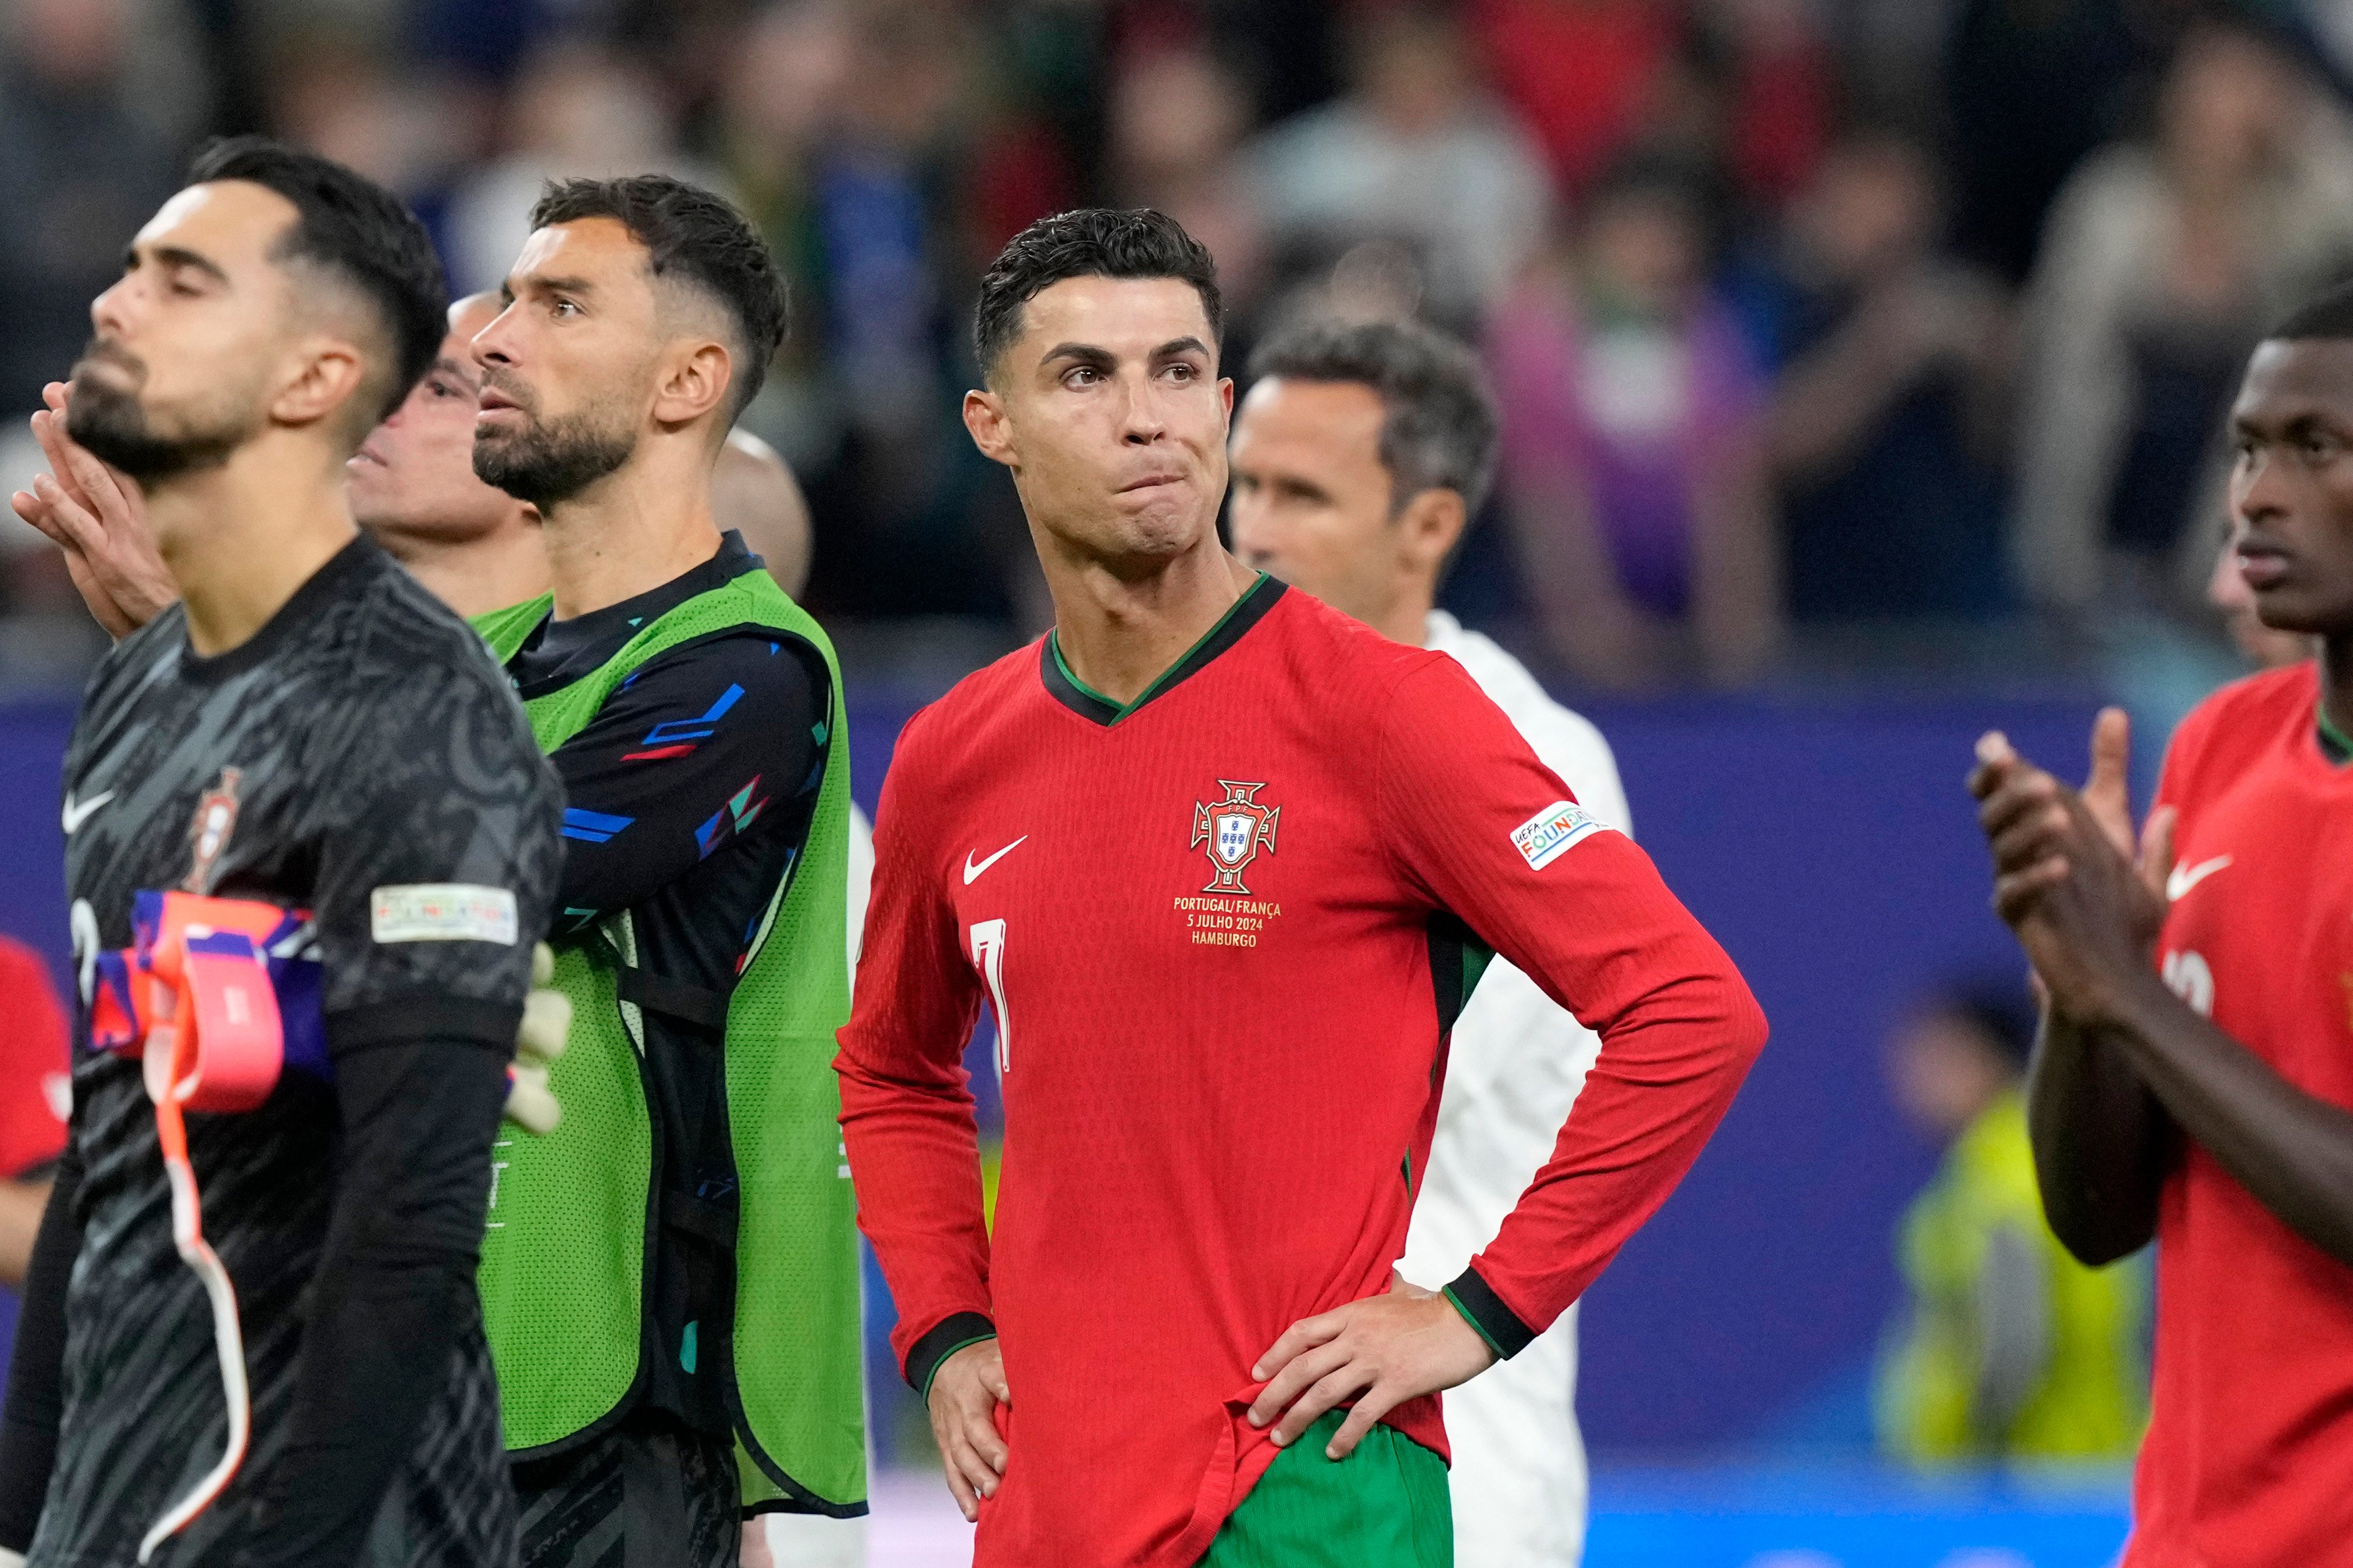 Portugal’s Cristiano Ronaldo could have played his last international after his side’s defeat to France in the European Championship. Photo: AP